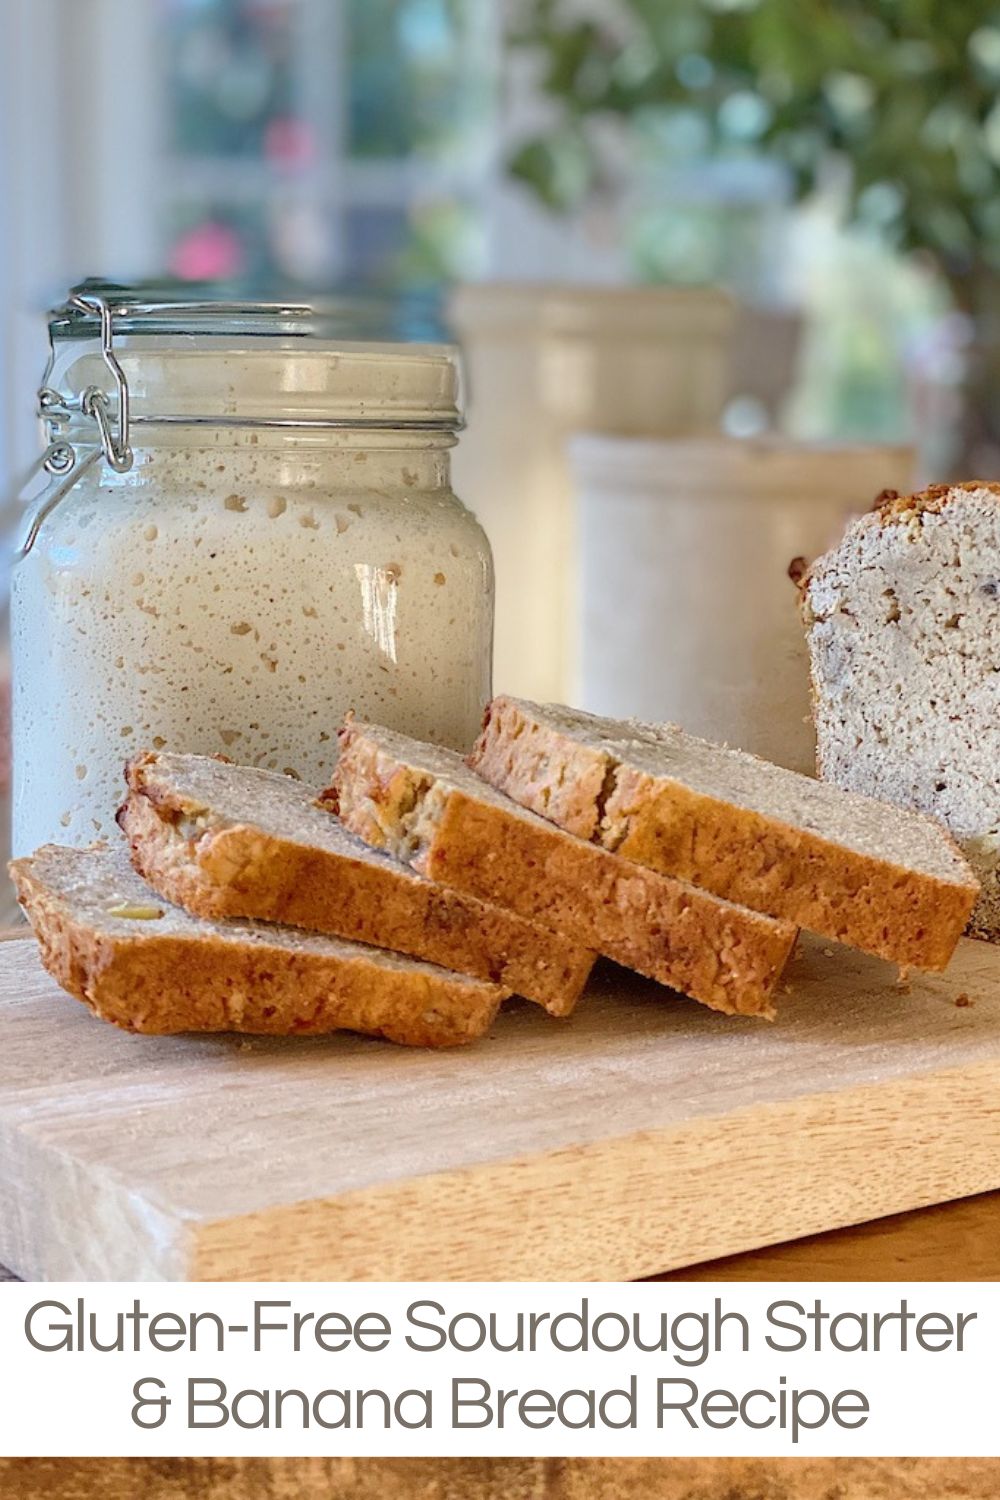 With fall finally here, it's time to think about making a sourdough starter. I just made a gluten-free sourdough starter and today I made a delicious Gluten-Free Sourdough Banana Bread Recipe. 